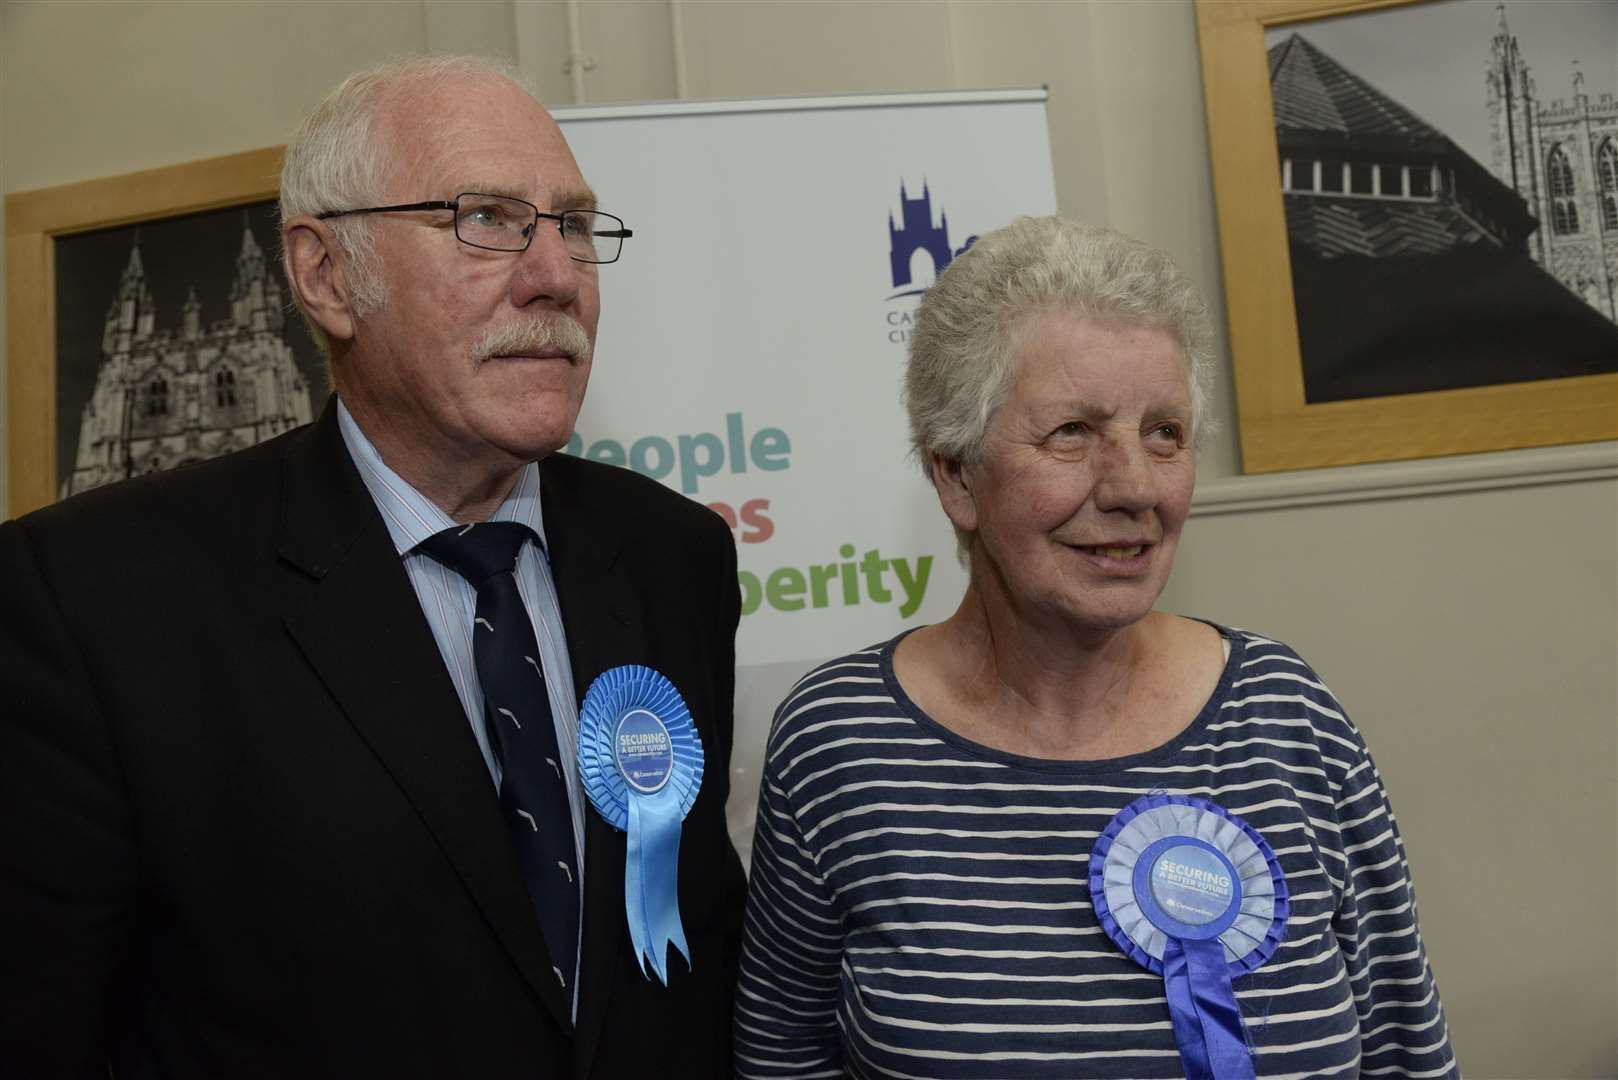 Chestfield Cllr's Pat Todd and Jenny Samper at Canterbury City Council election count at the Westgate Hall on Friday. Picture: Chris Davey FM3801012 (12012019)